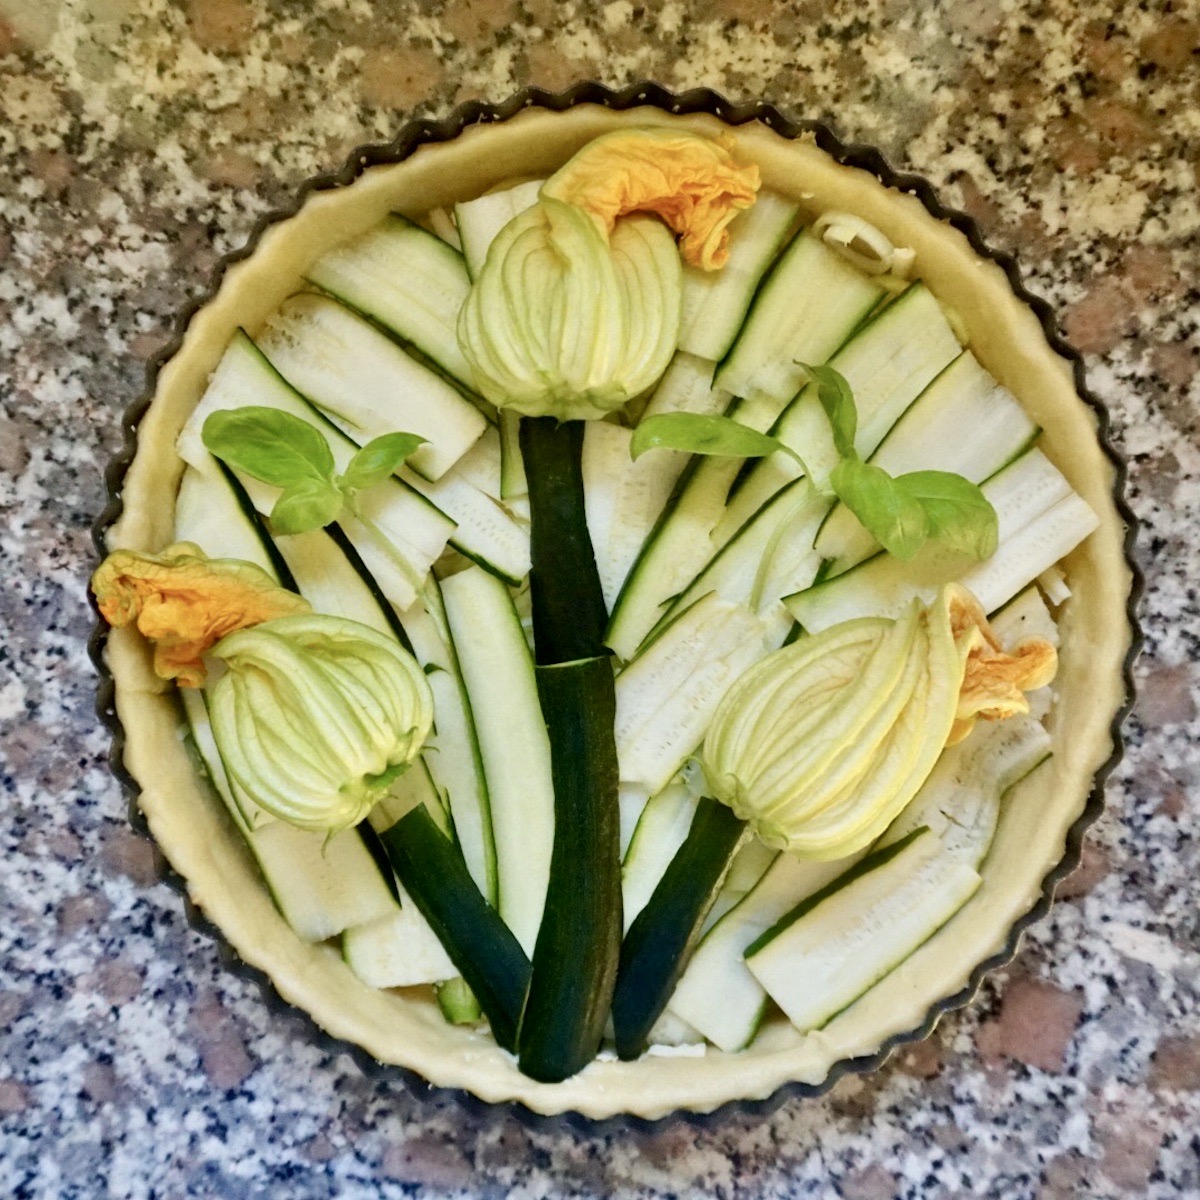 An uncooked courgette quiche decorated with courgette flowers.